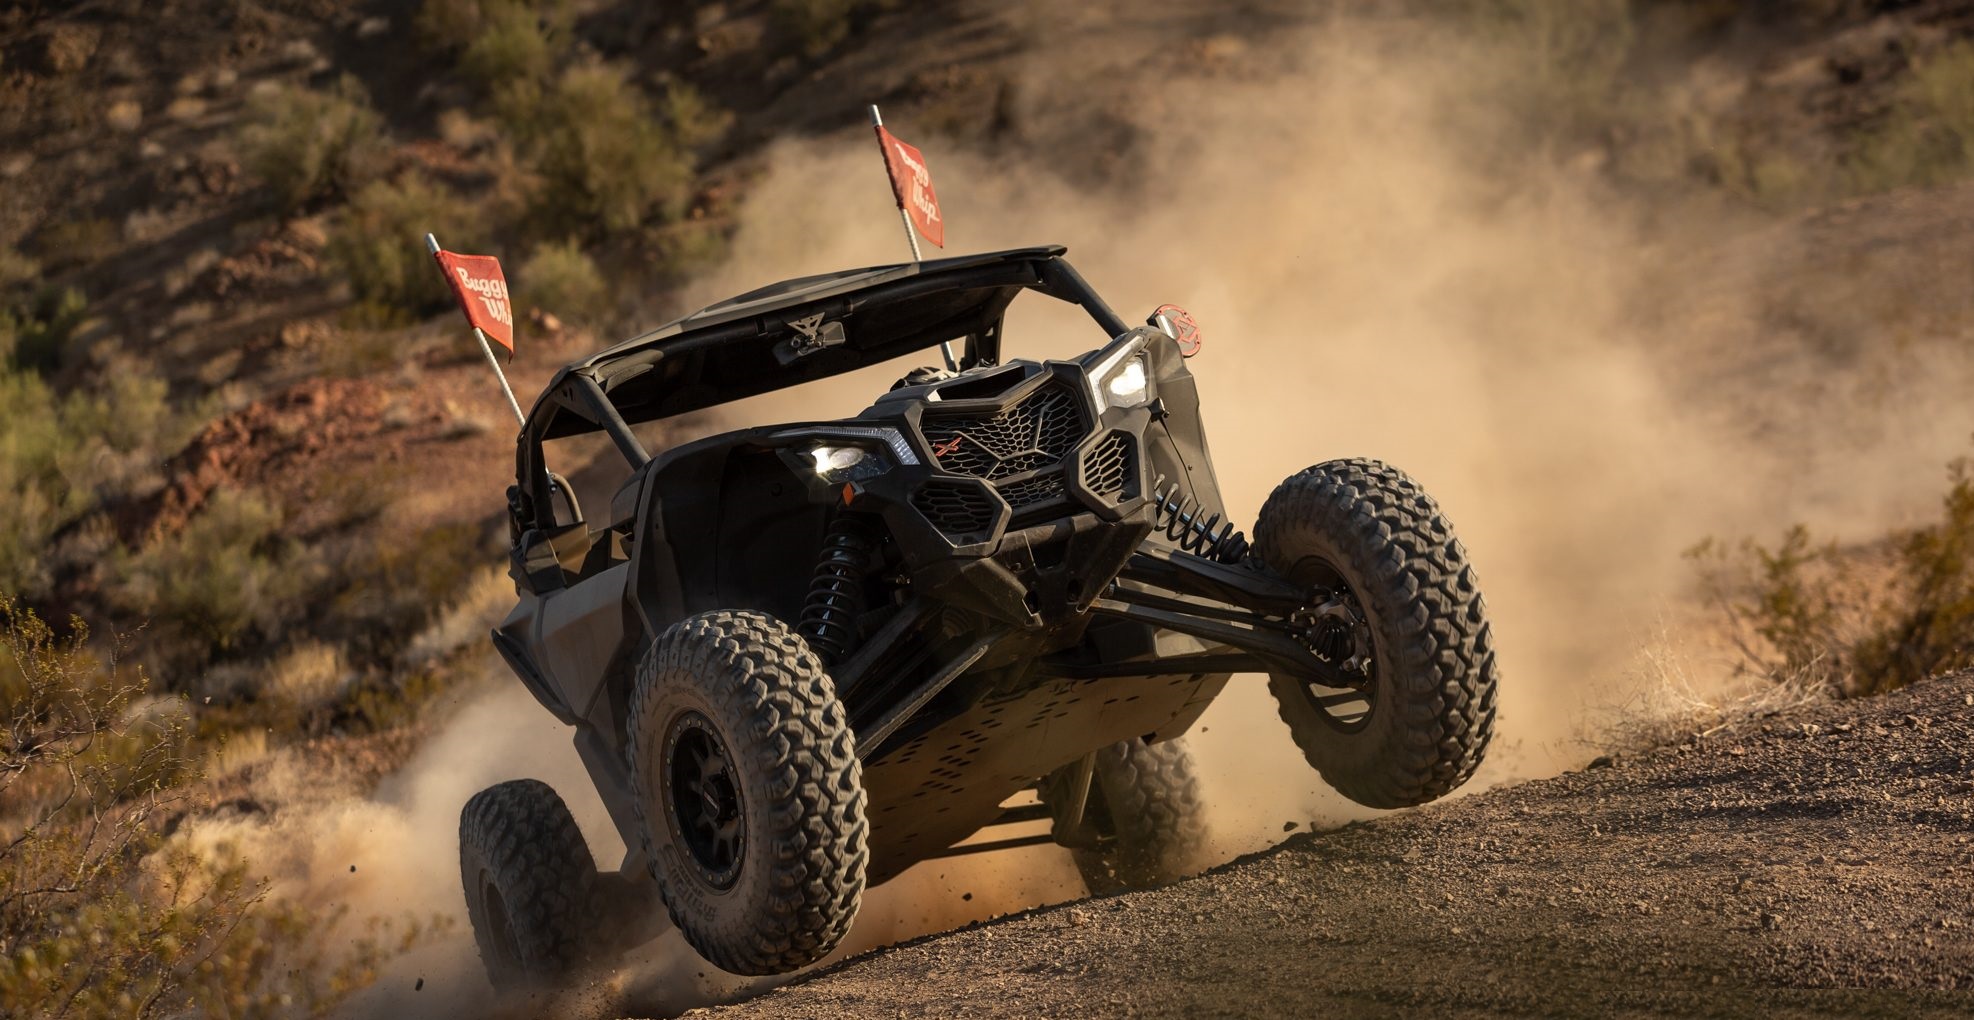 Stock Tire And Wheel Specs For The Can-Am Maverick